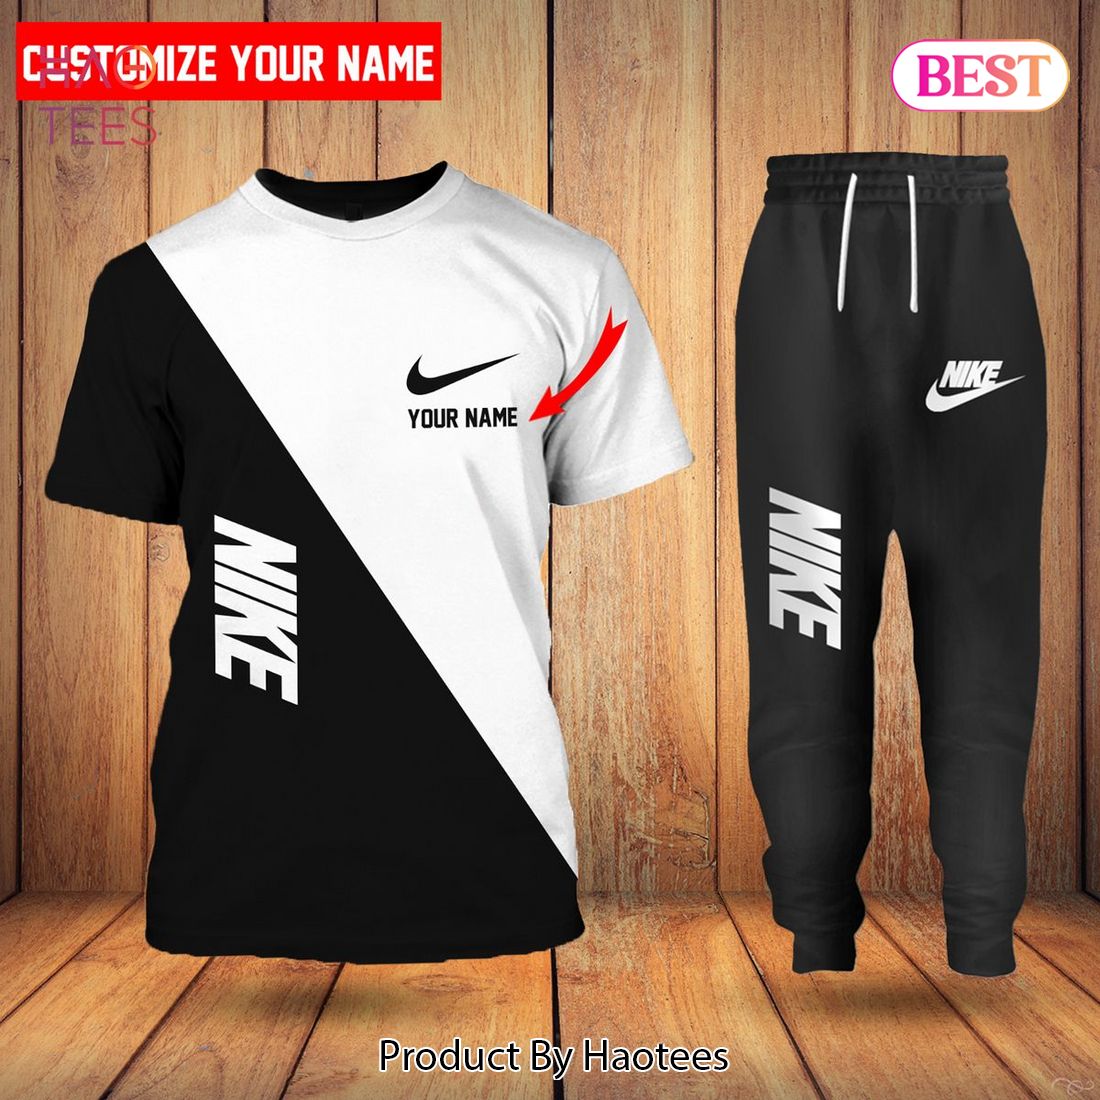 NEW Nike Basic Color Black Mix White Luxury Brand T-Shirt And Pants Limited Edition